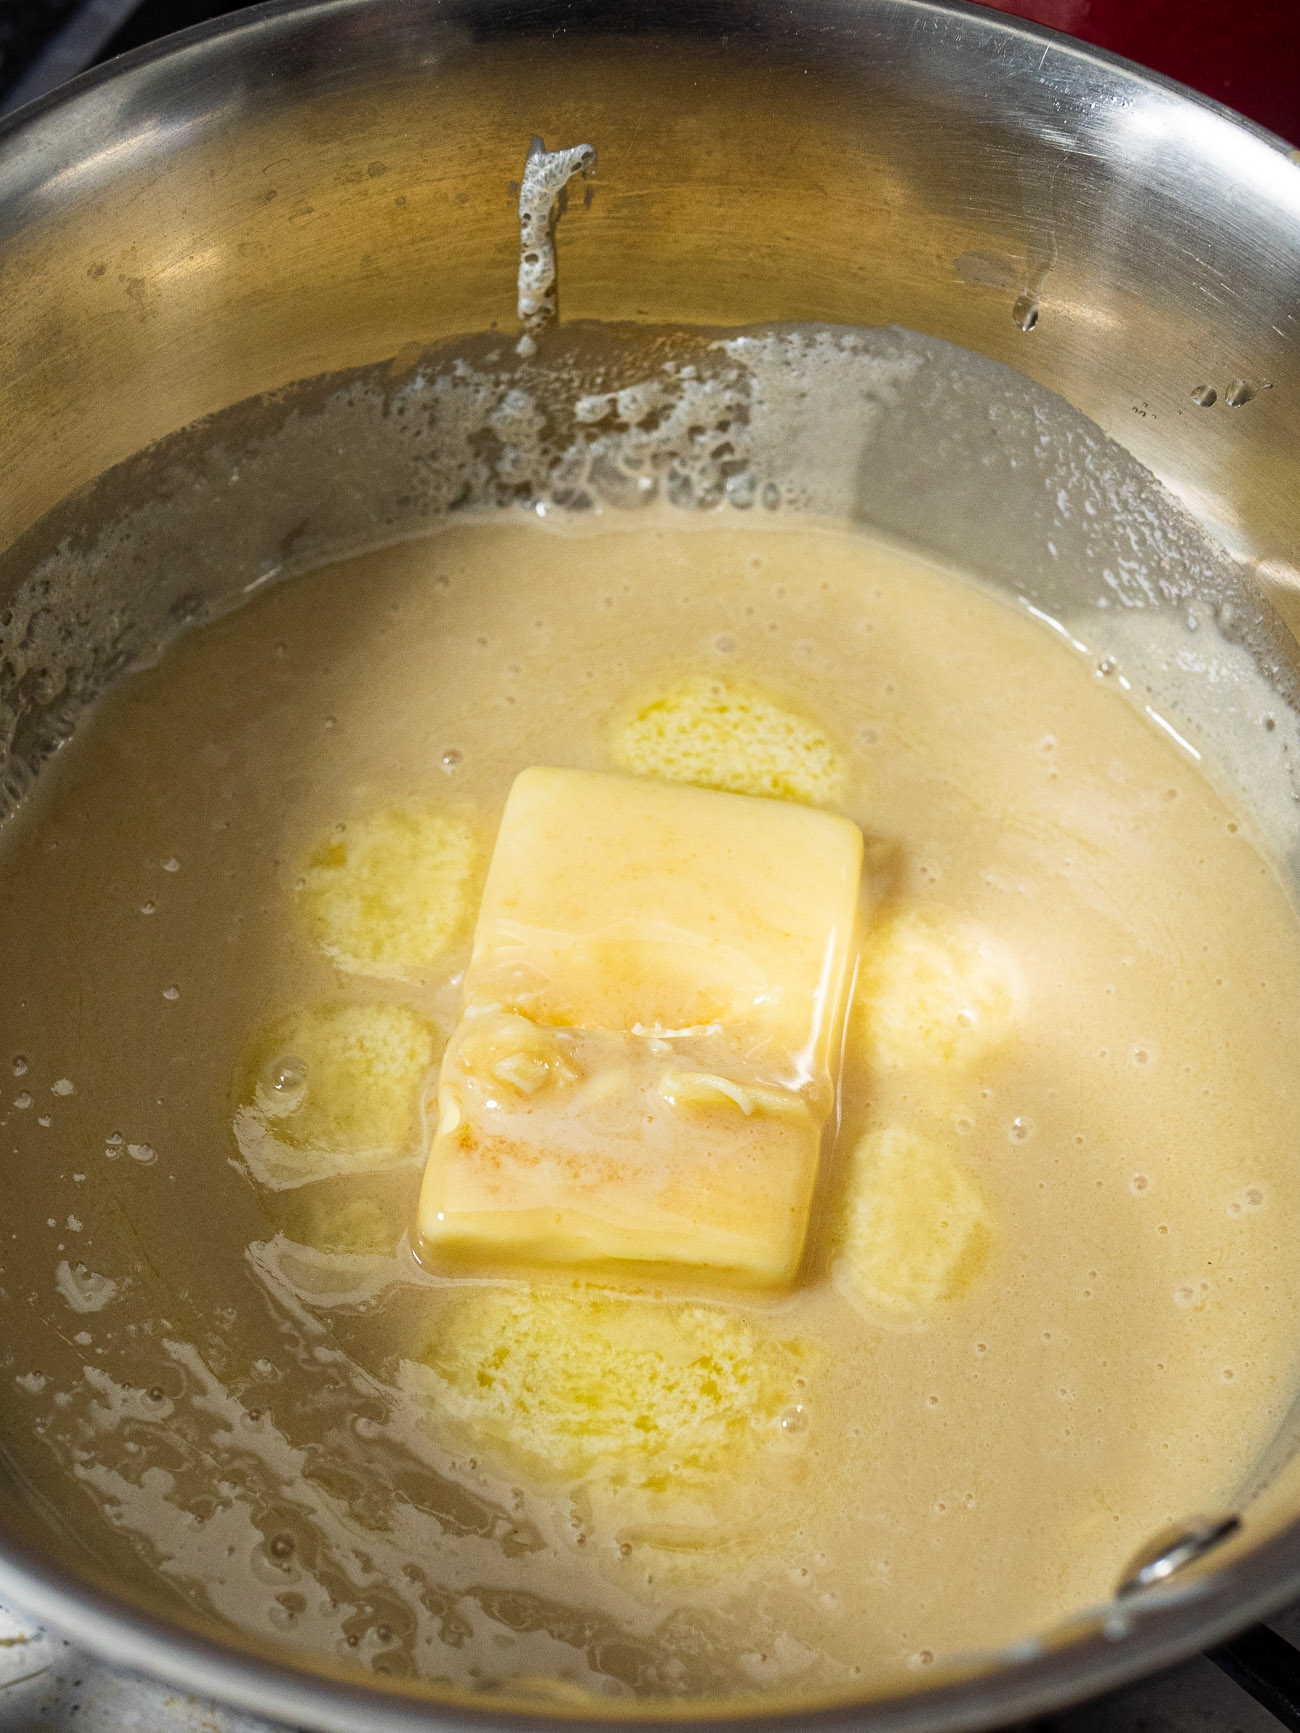 Add brown sugar, butter, and sweetened condensed milk to a small saucepan and bring to a boil. Reduce the heat to low and simmer until thickened while stirring often.